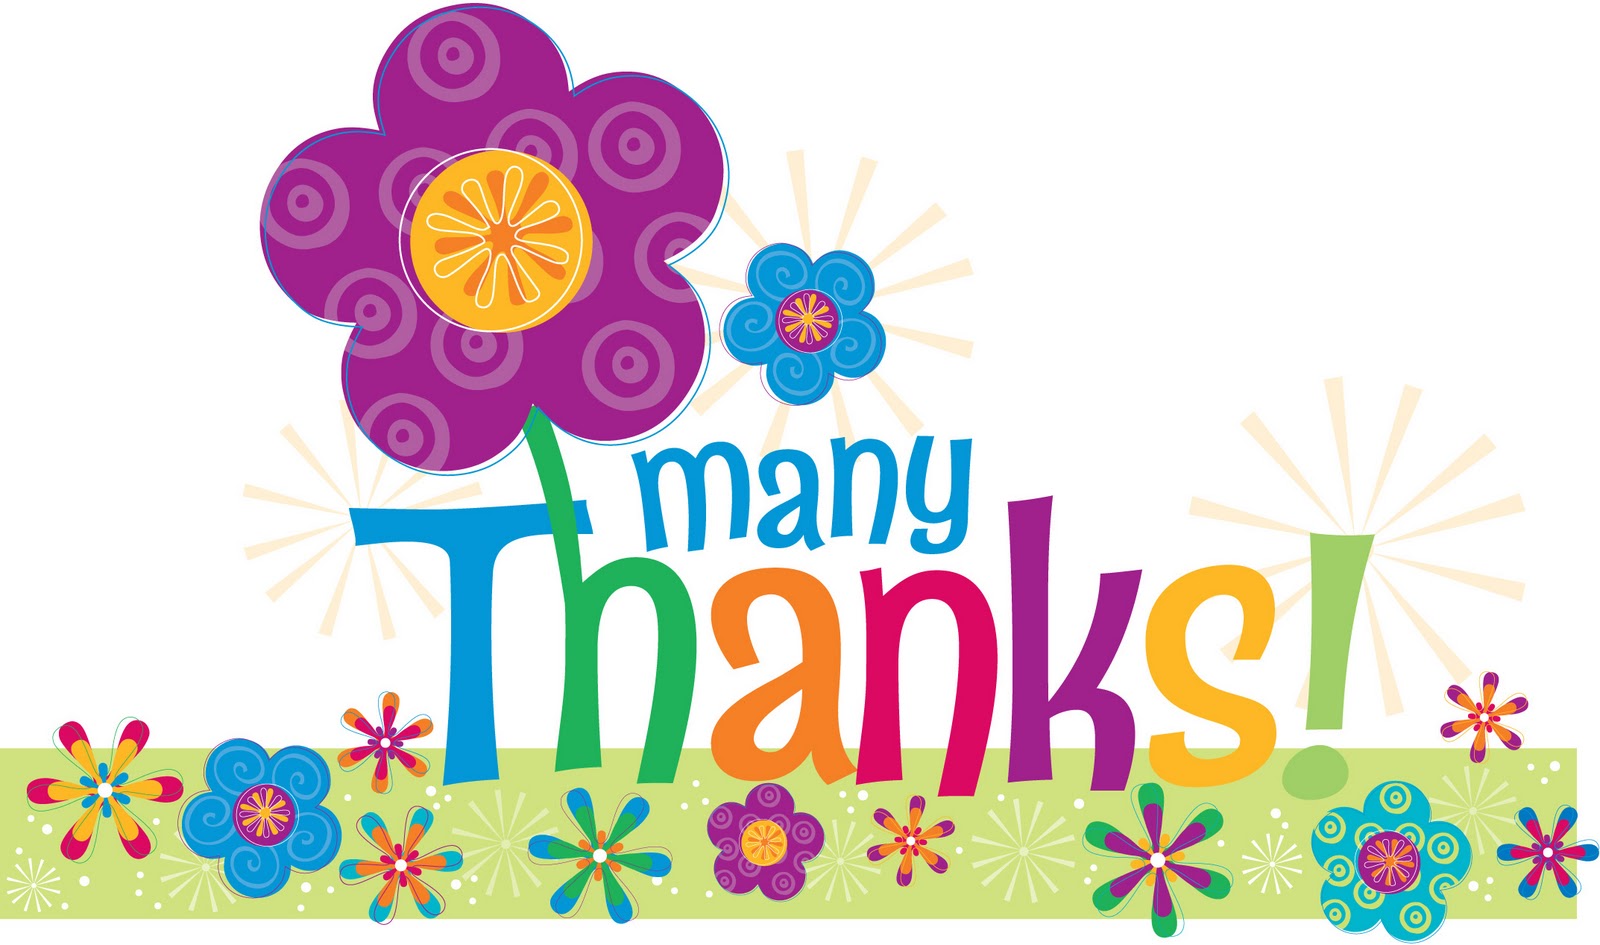 free clipart animated thank you - photo #29